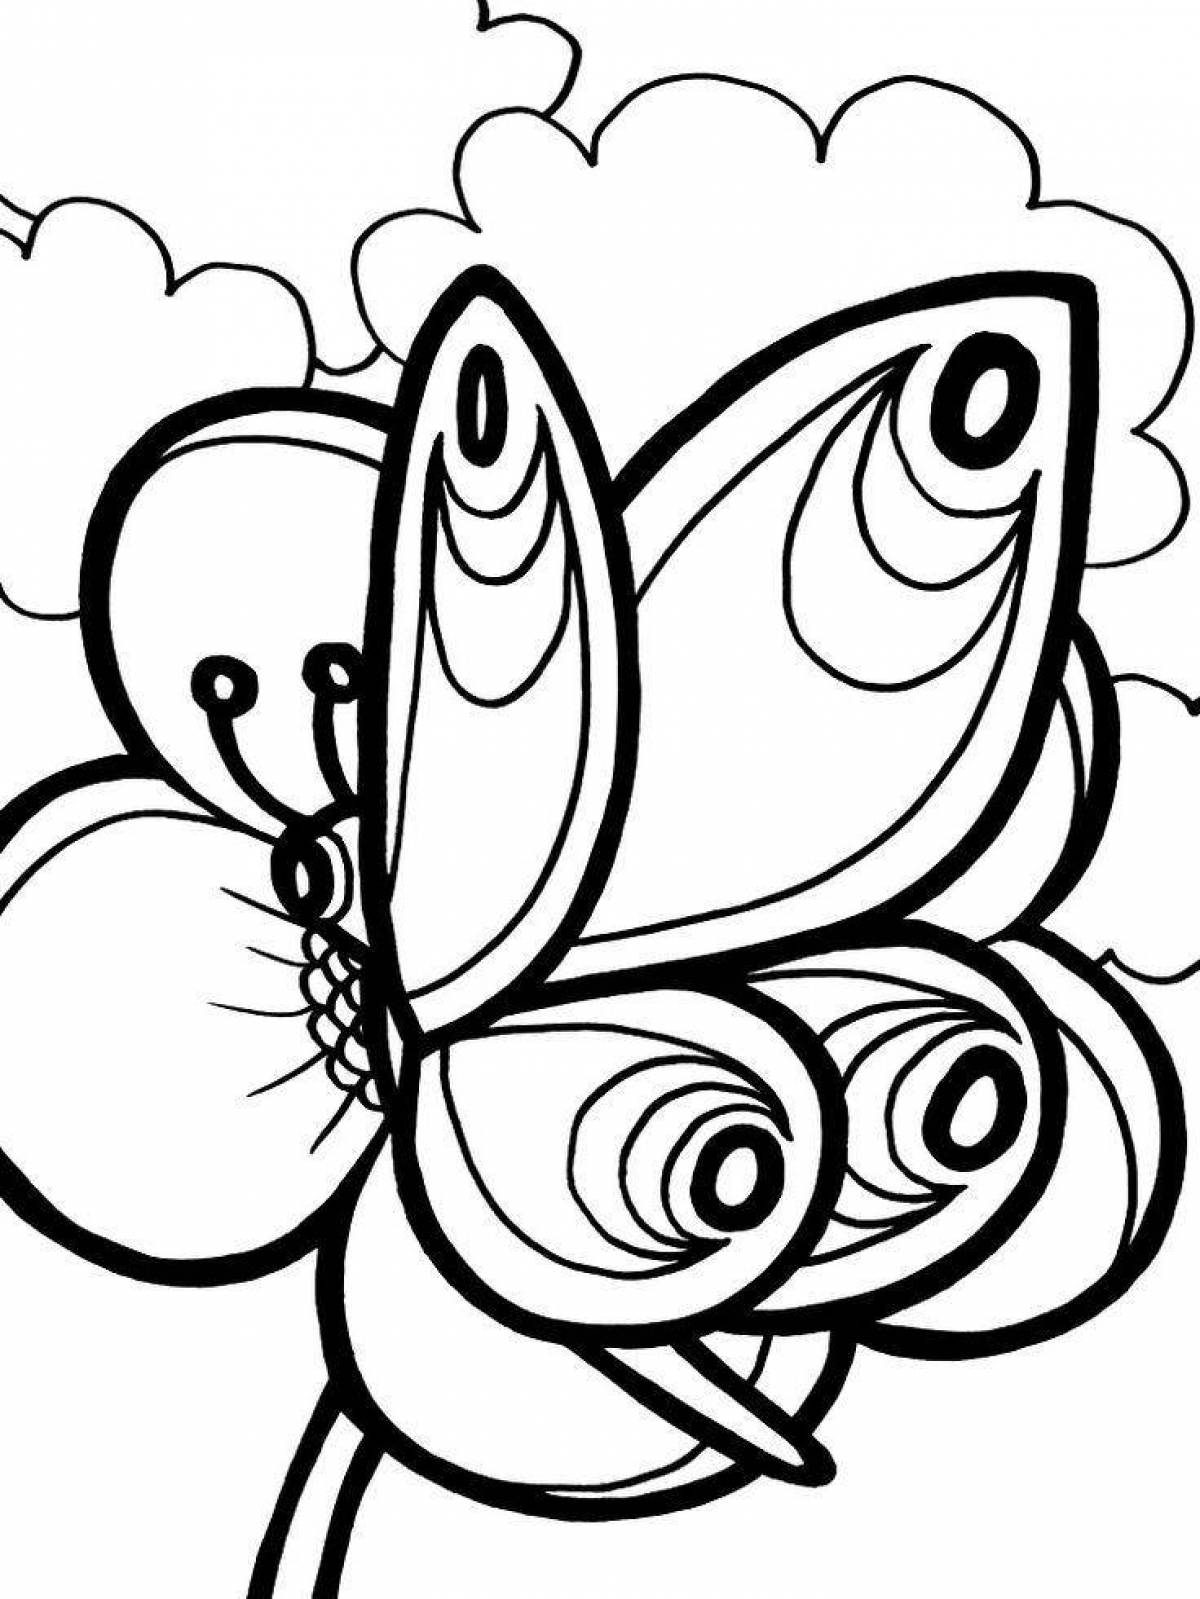 Fairytale butterfly coloring book for girls